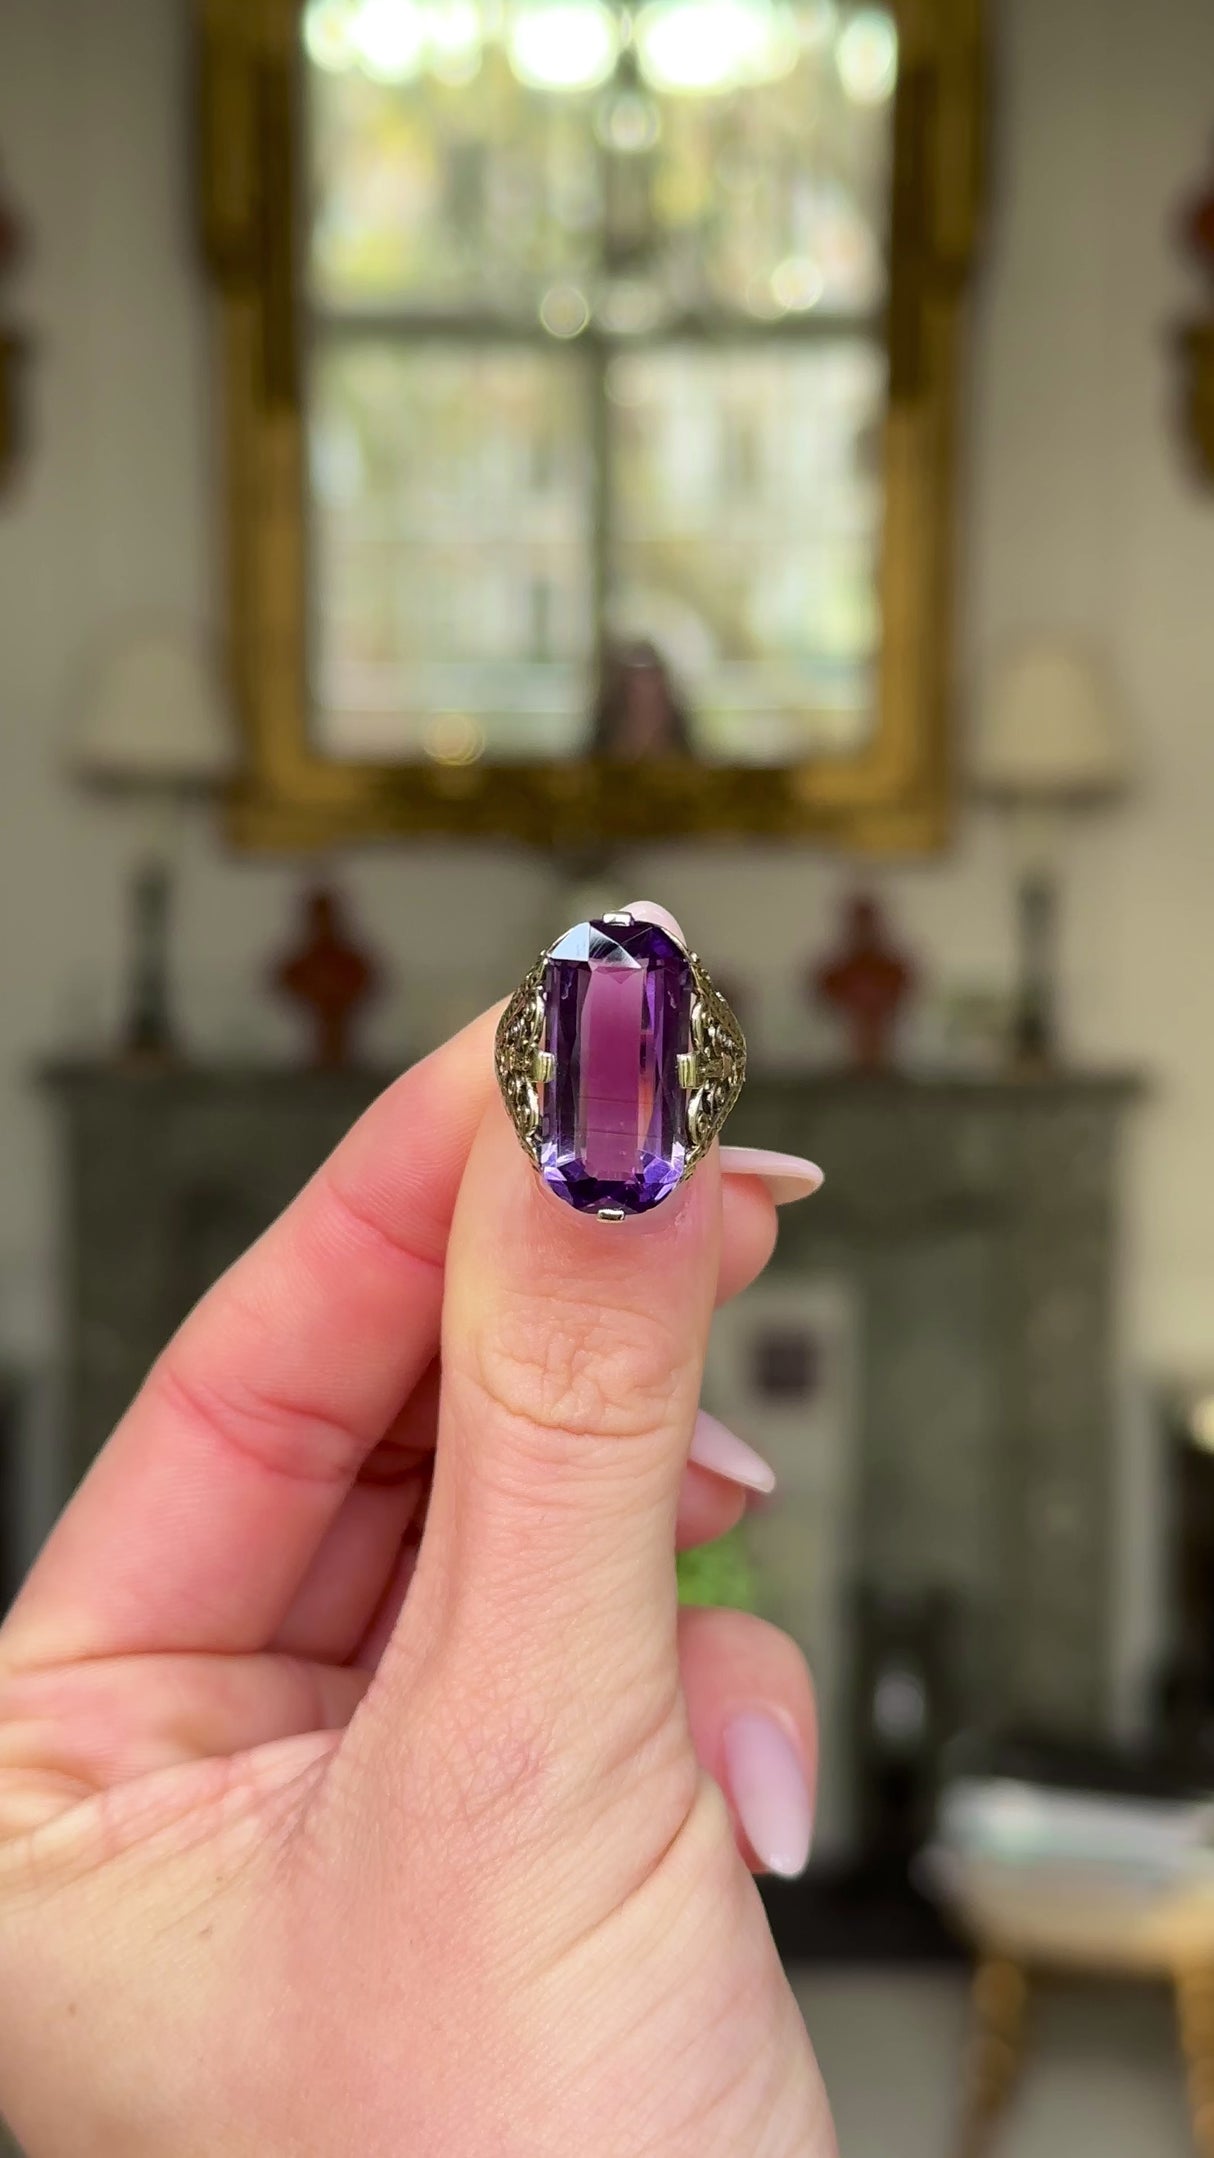 Victorian amethyst and 14ct yellow gold ring held in fingers and moved around to give perspective.